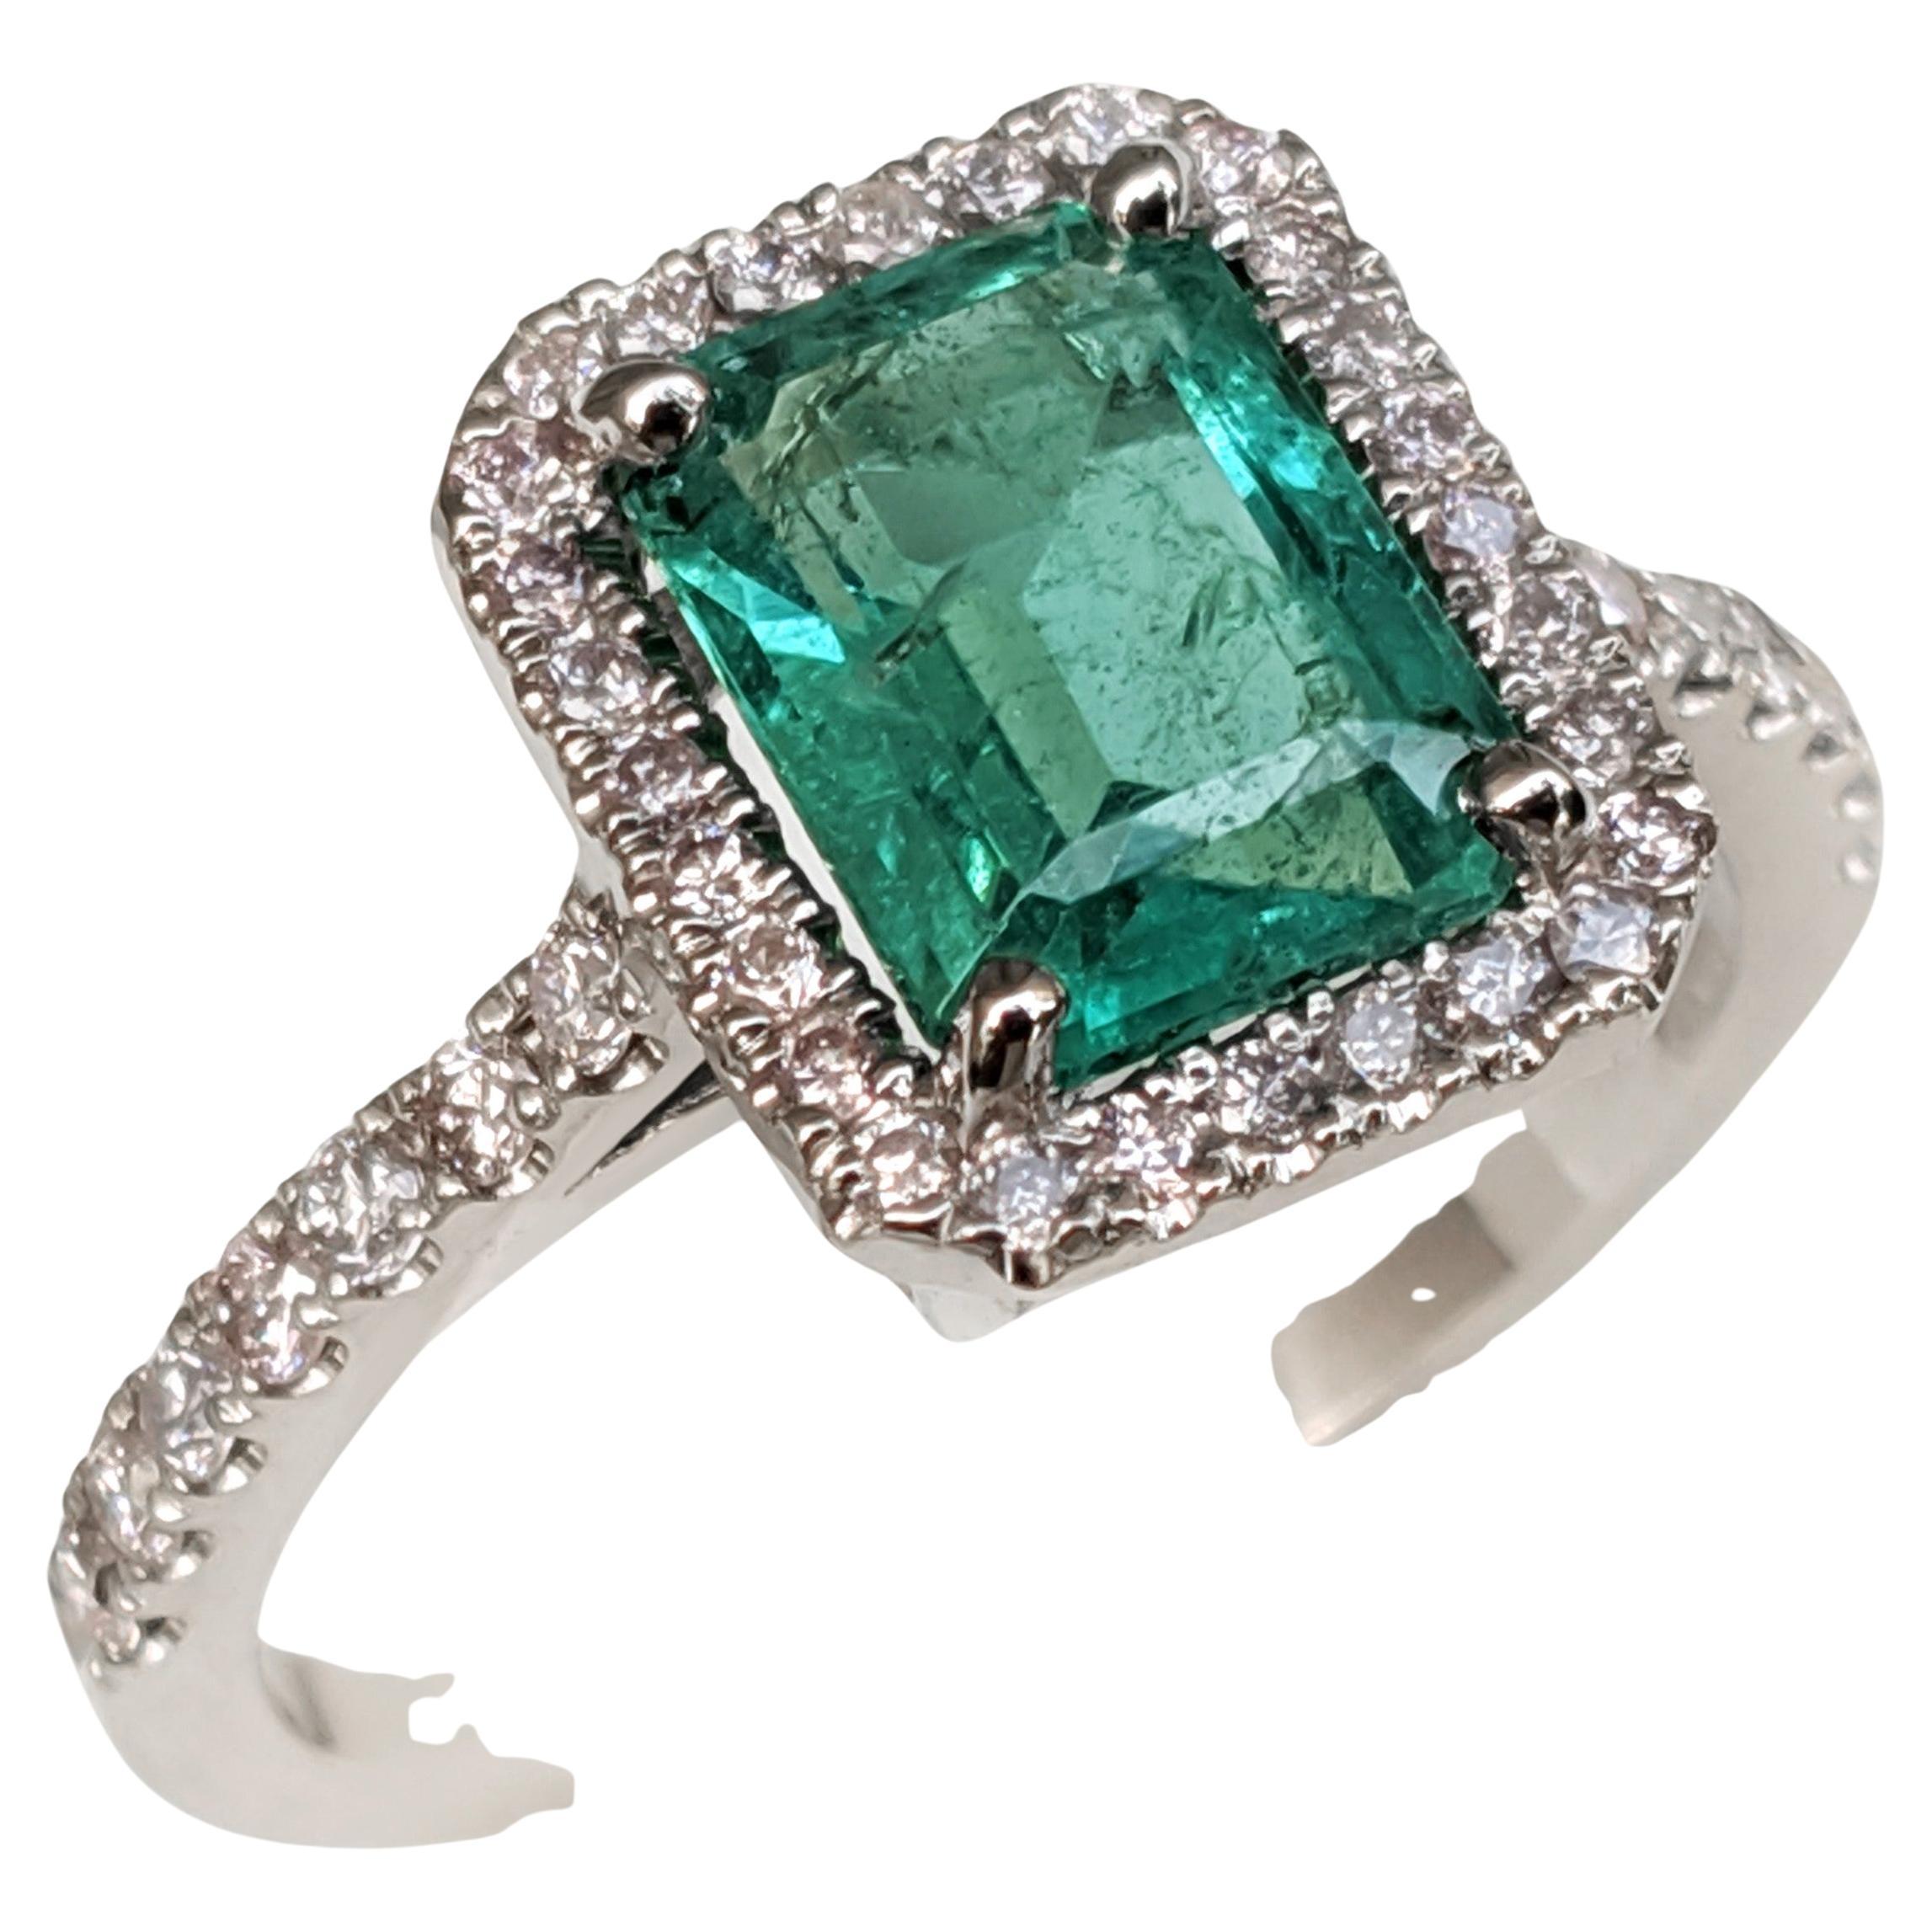 NO RESERVE! 2.05 Carat Emerald and 0.41Ct Diamonds - 14 kt. White gold - Ring For Sale